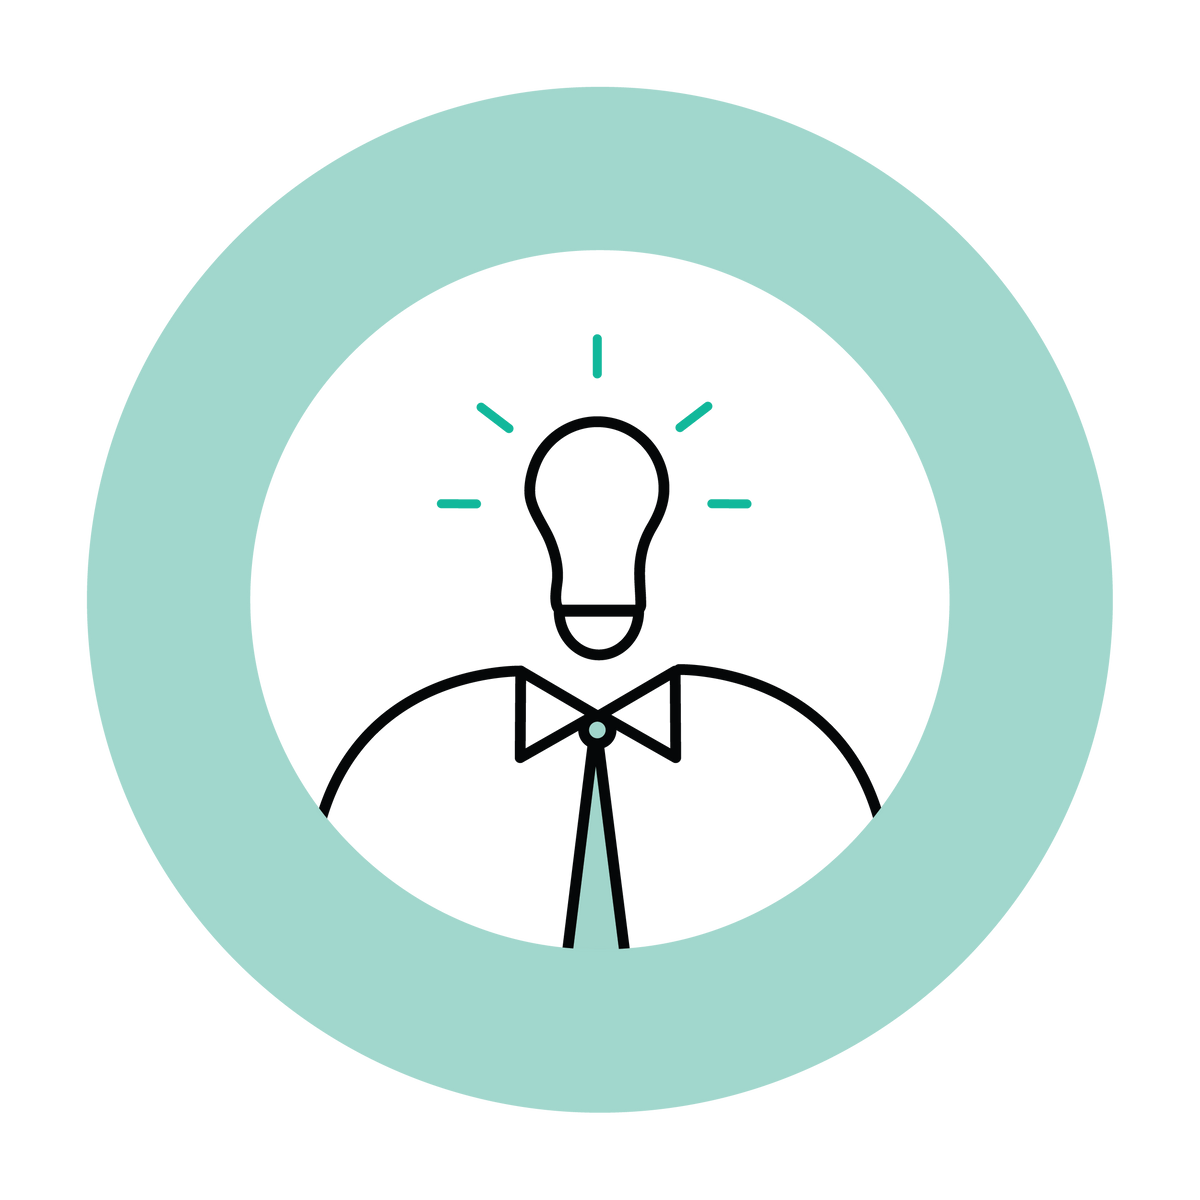 teal circle with a light bulb icon as a head on a suited person